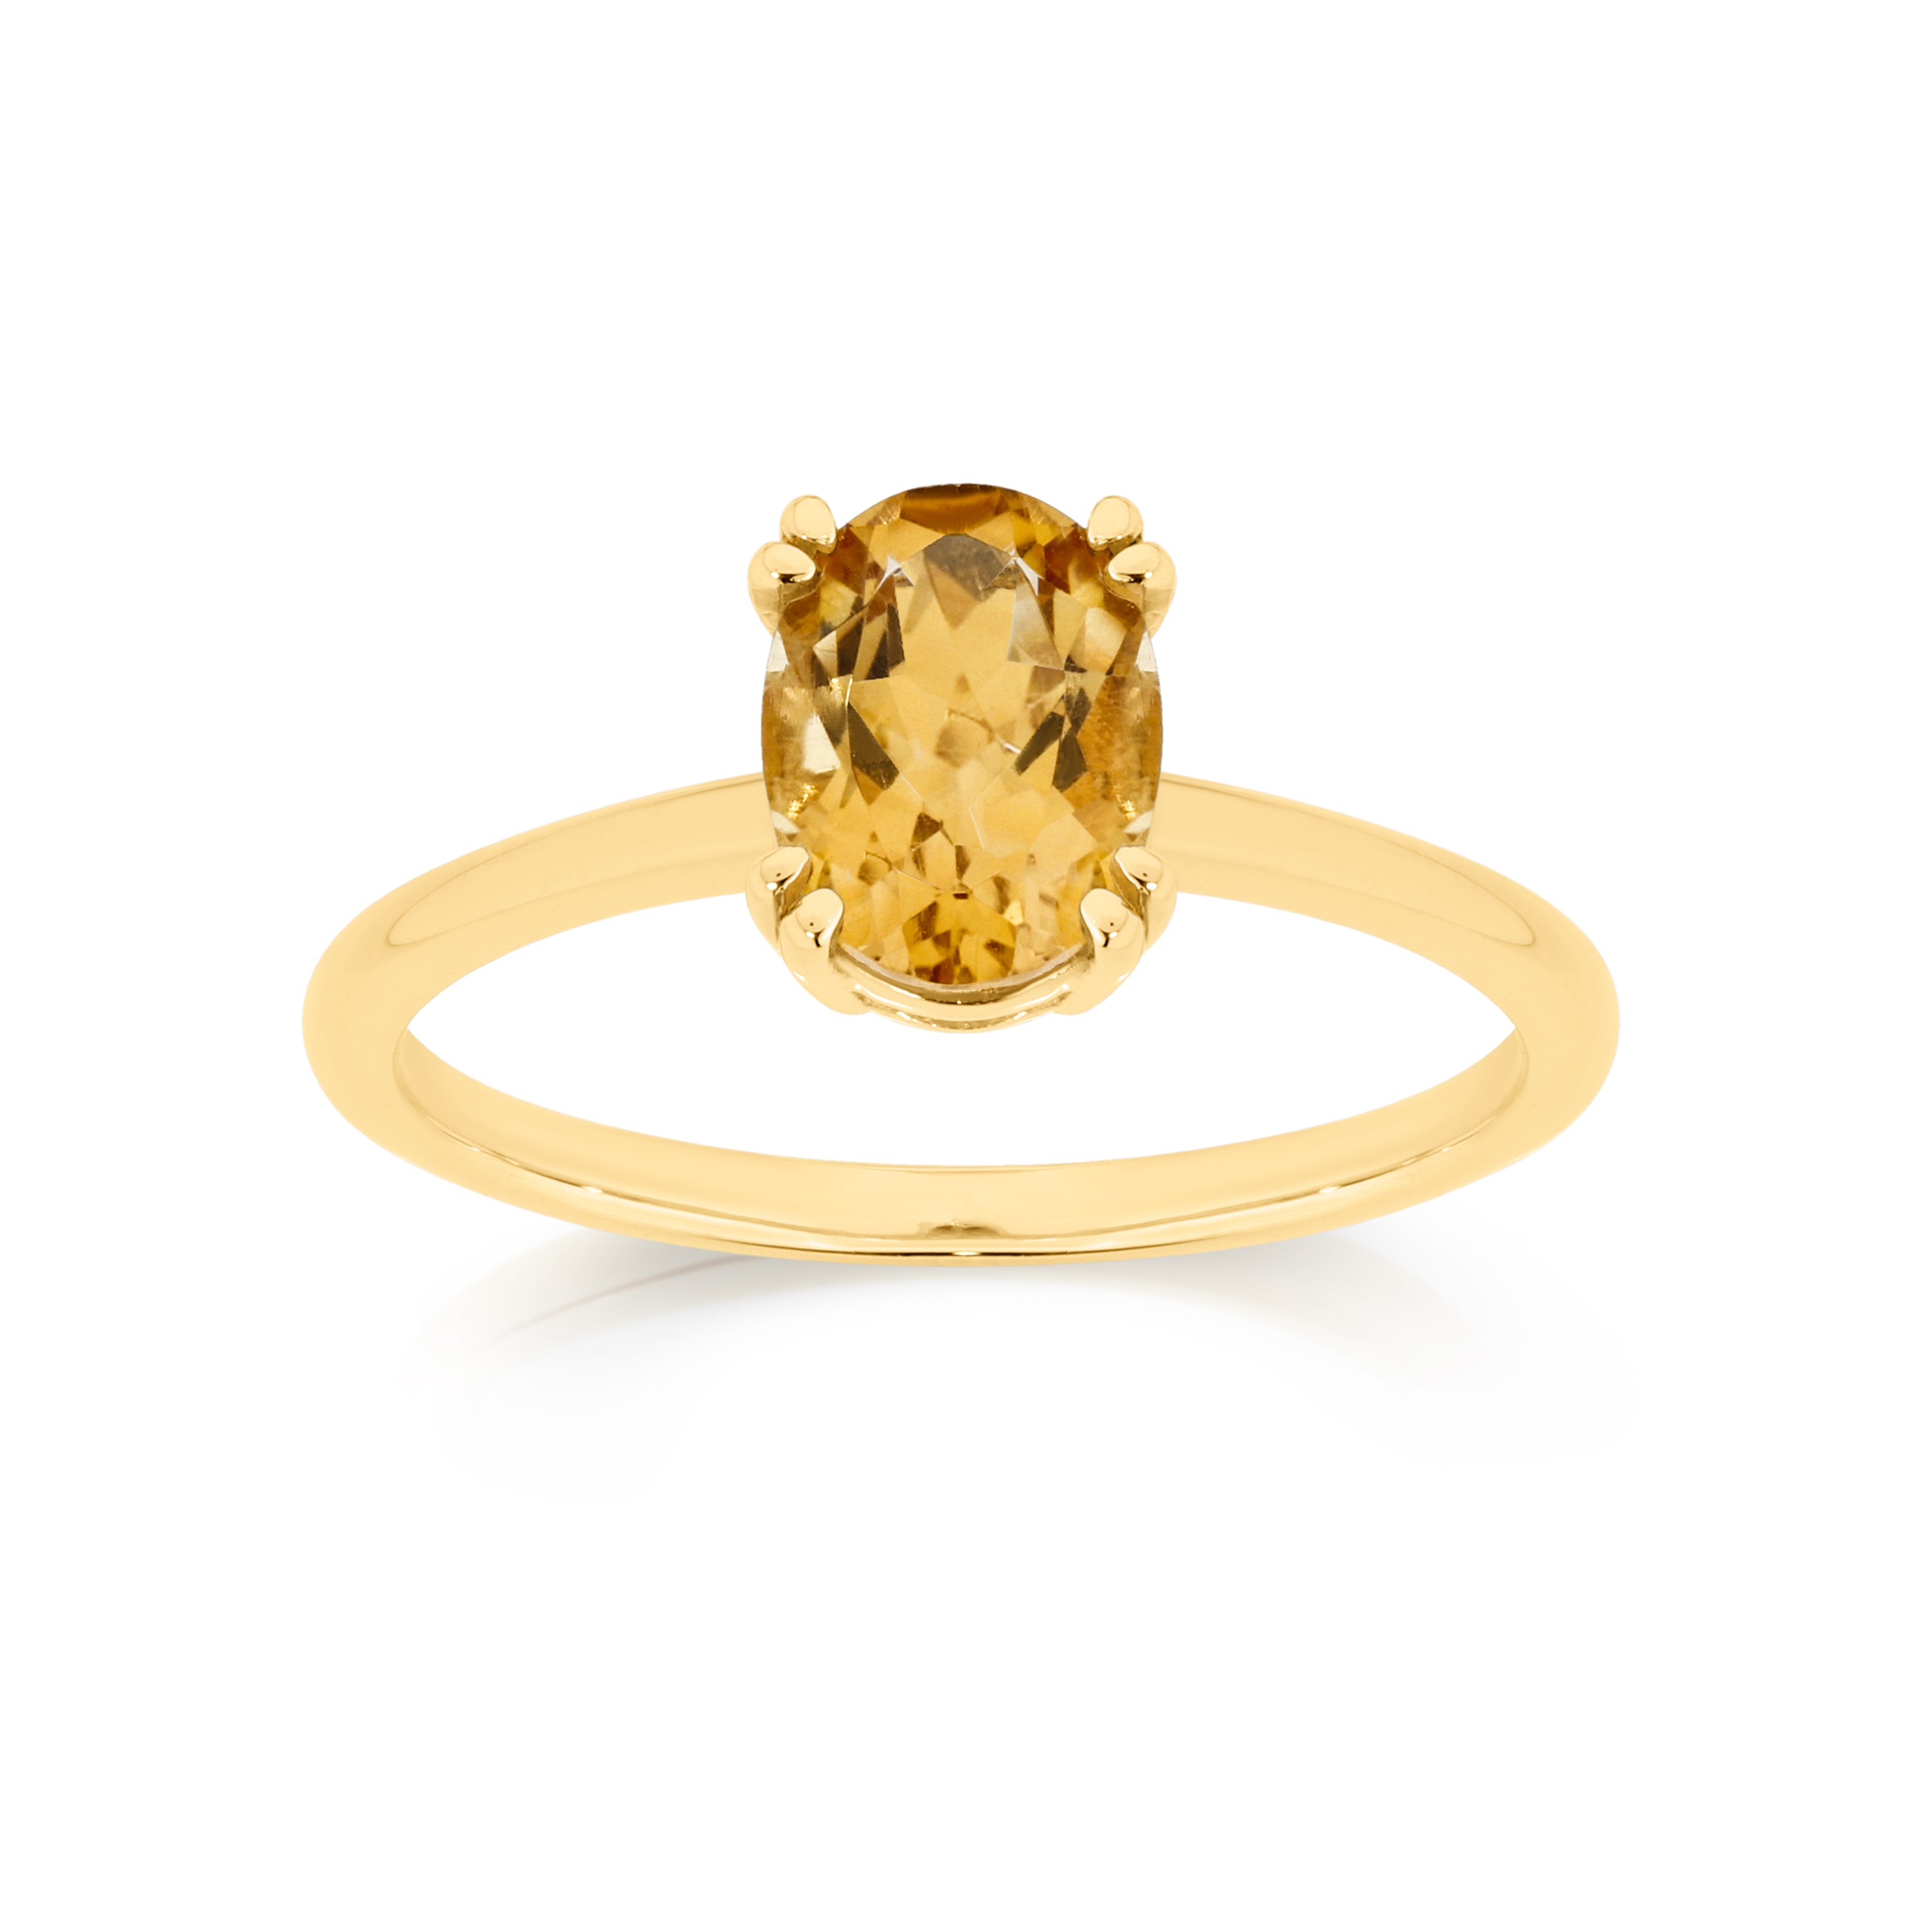 9ct 8x6mm oval citrine solitaire